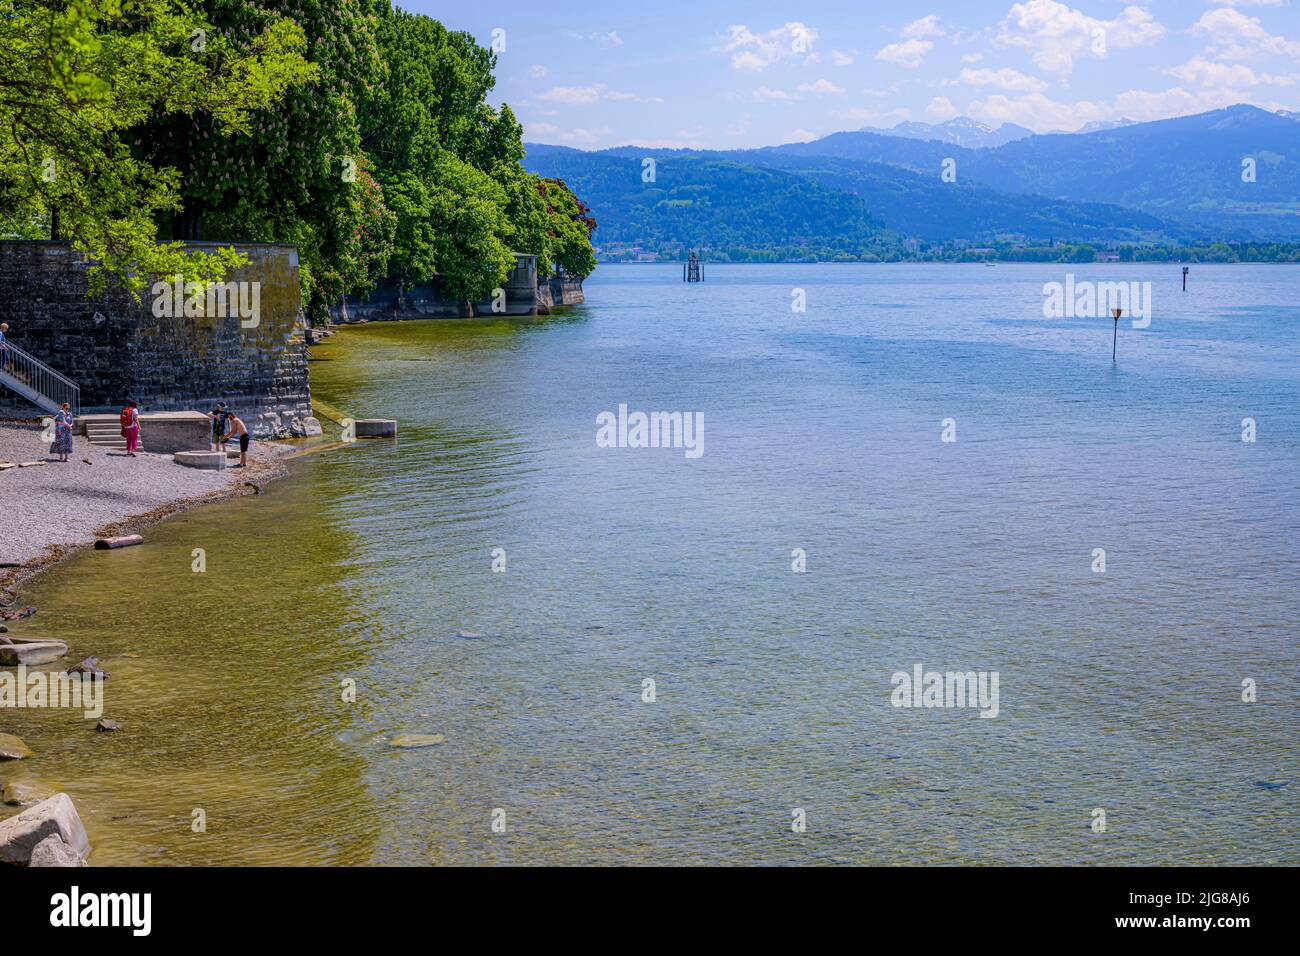 Lake Constance, western view from the park, Lindau Island, Reutin, Swabia, Germany, Europe Stock Photo